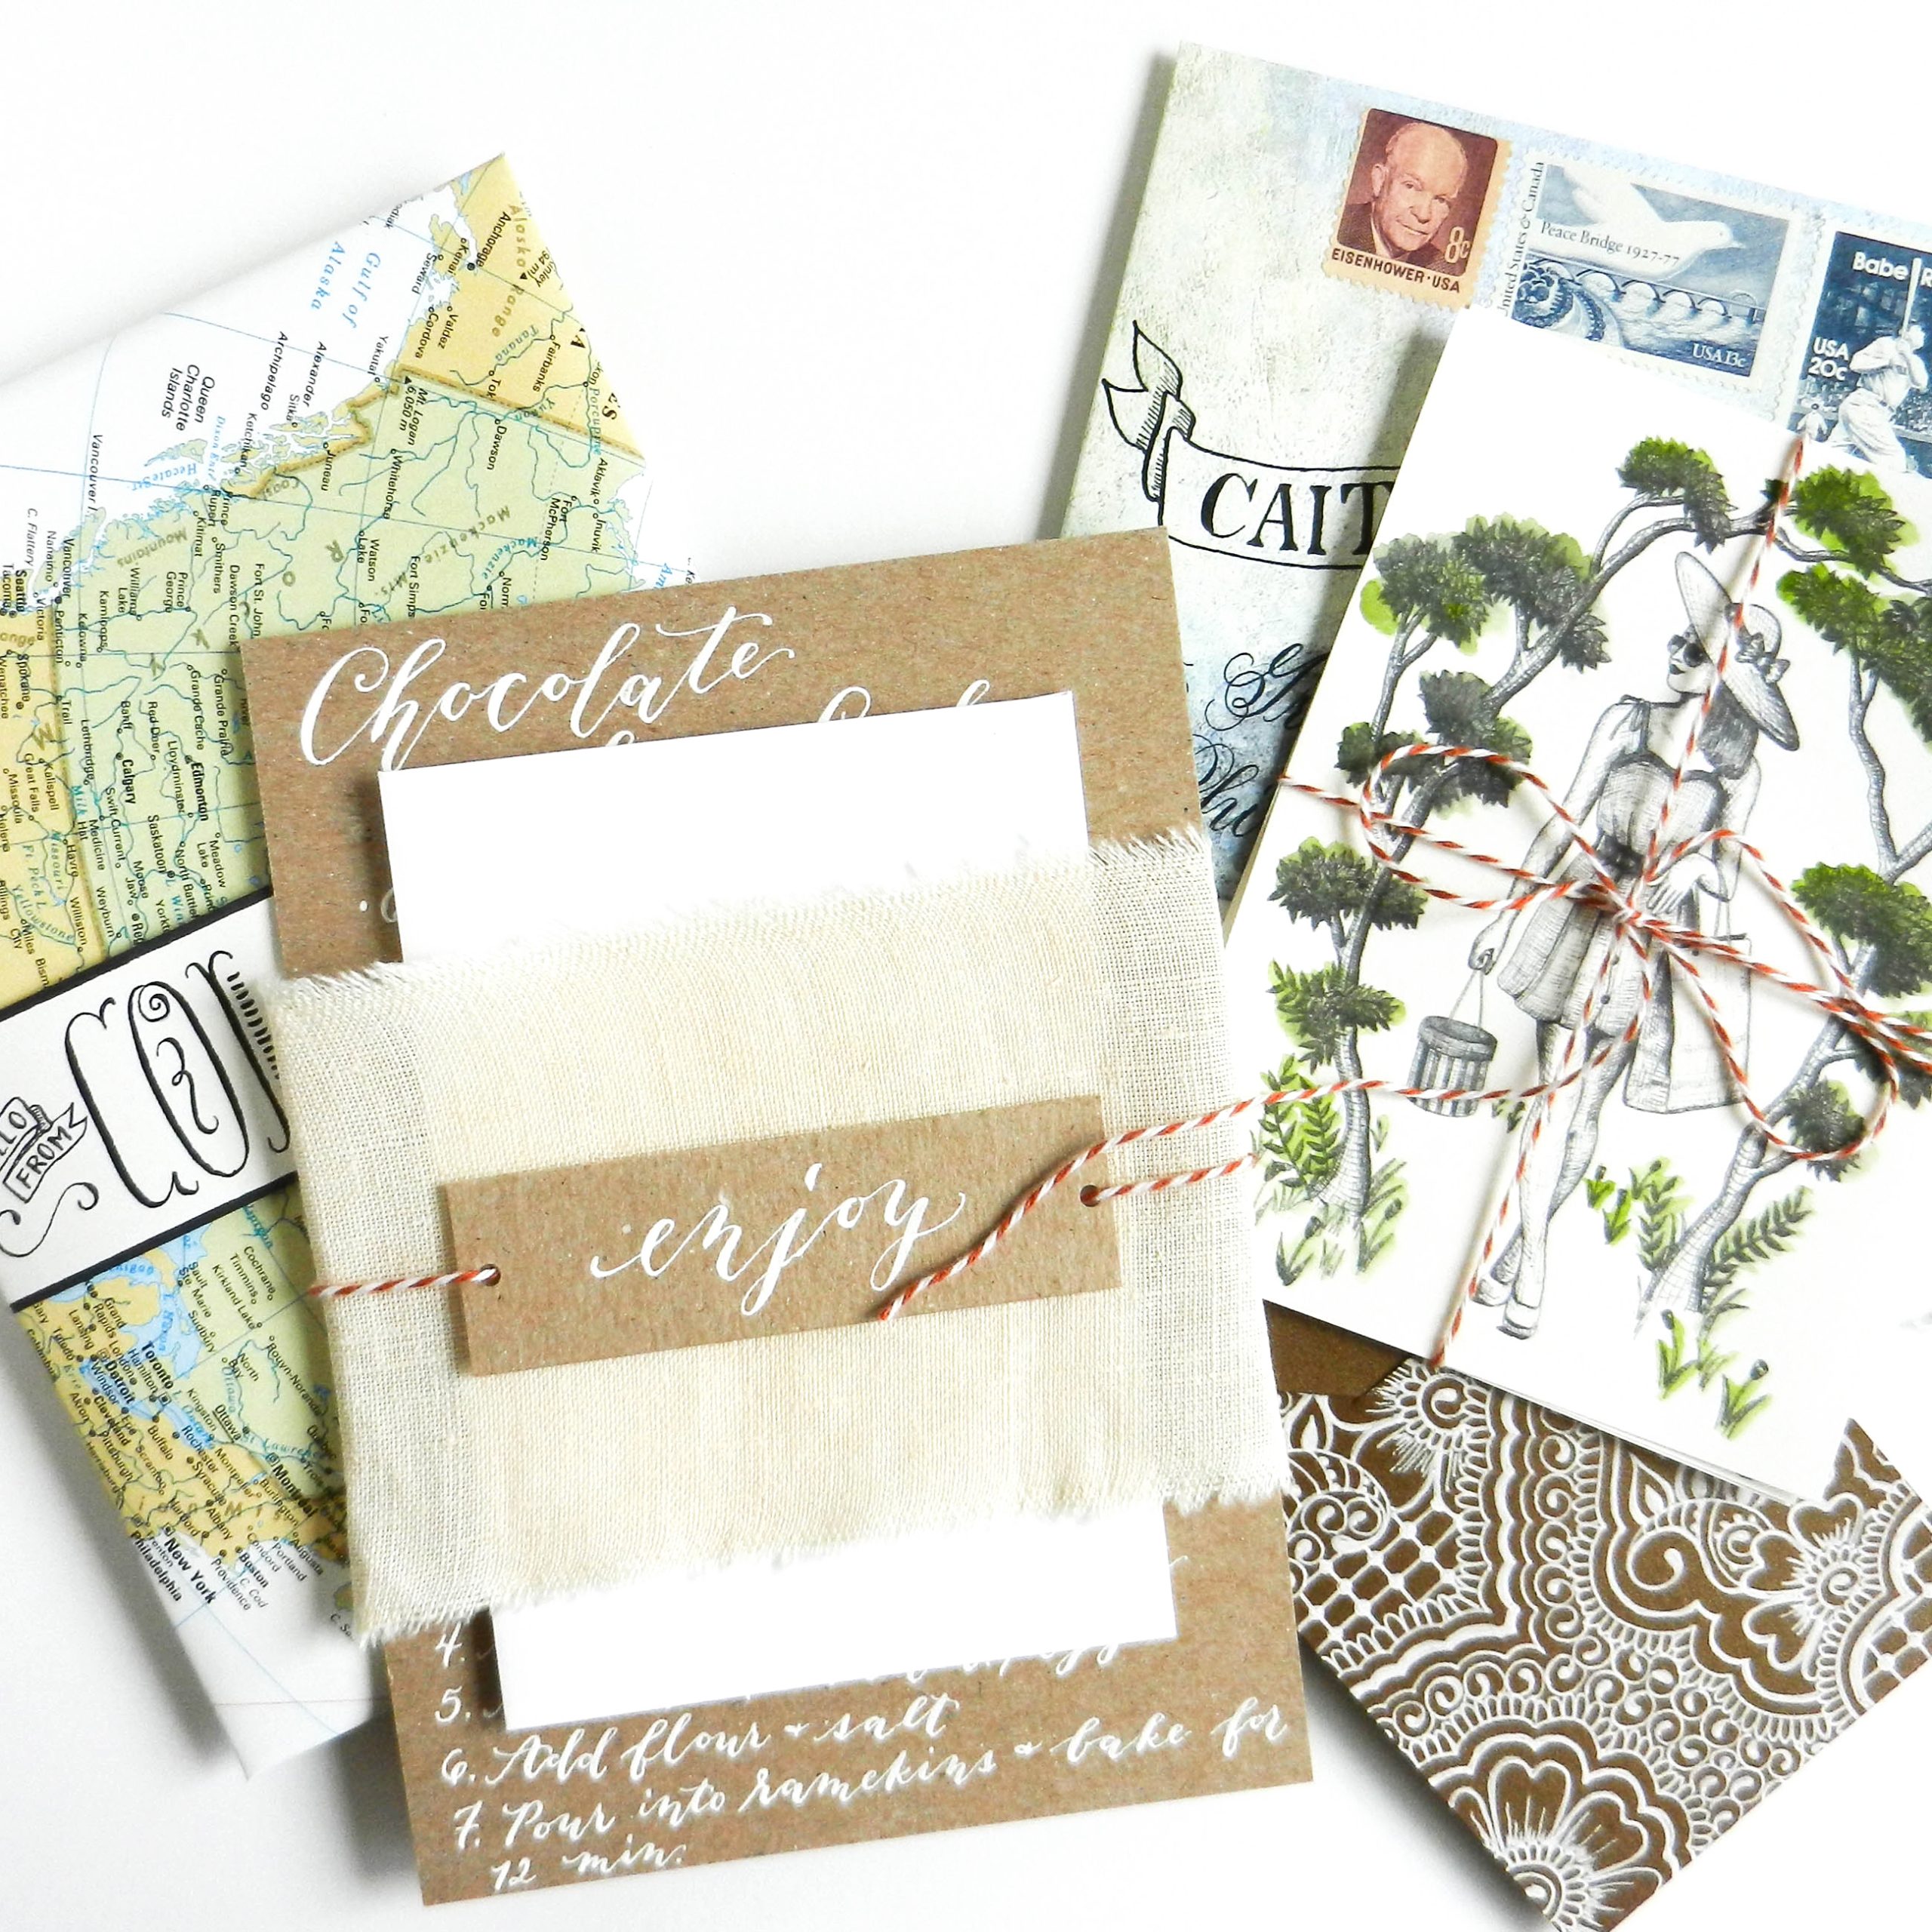 snail mail letter ideas scaled